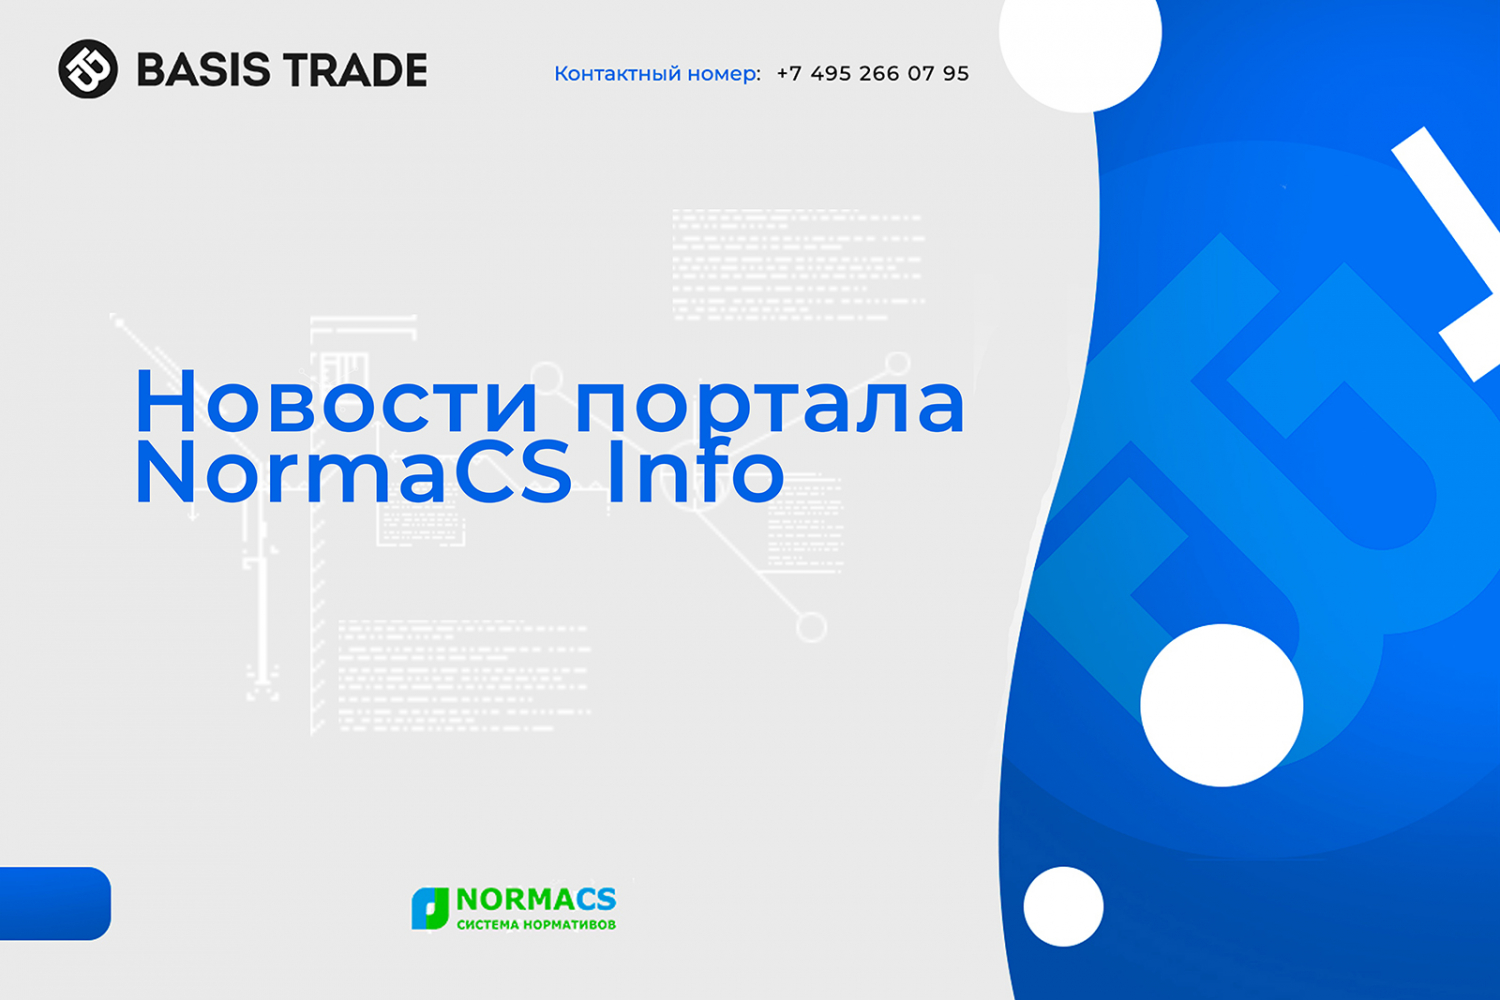 NormaCS Info